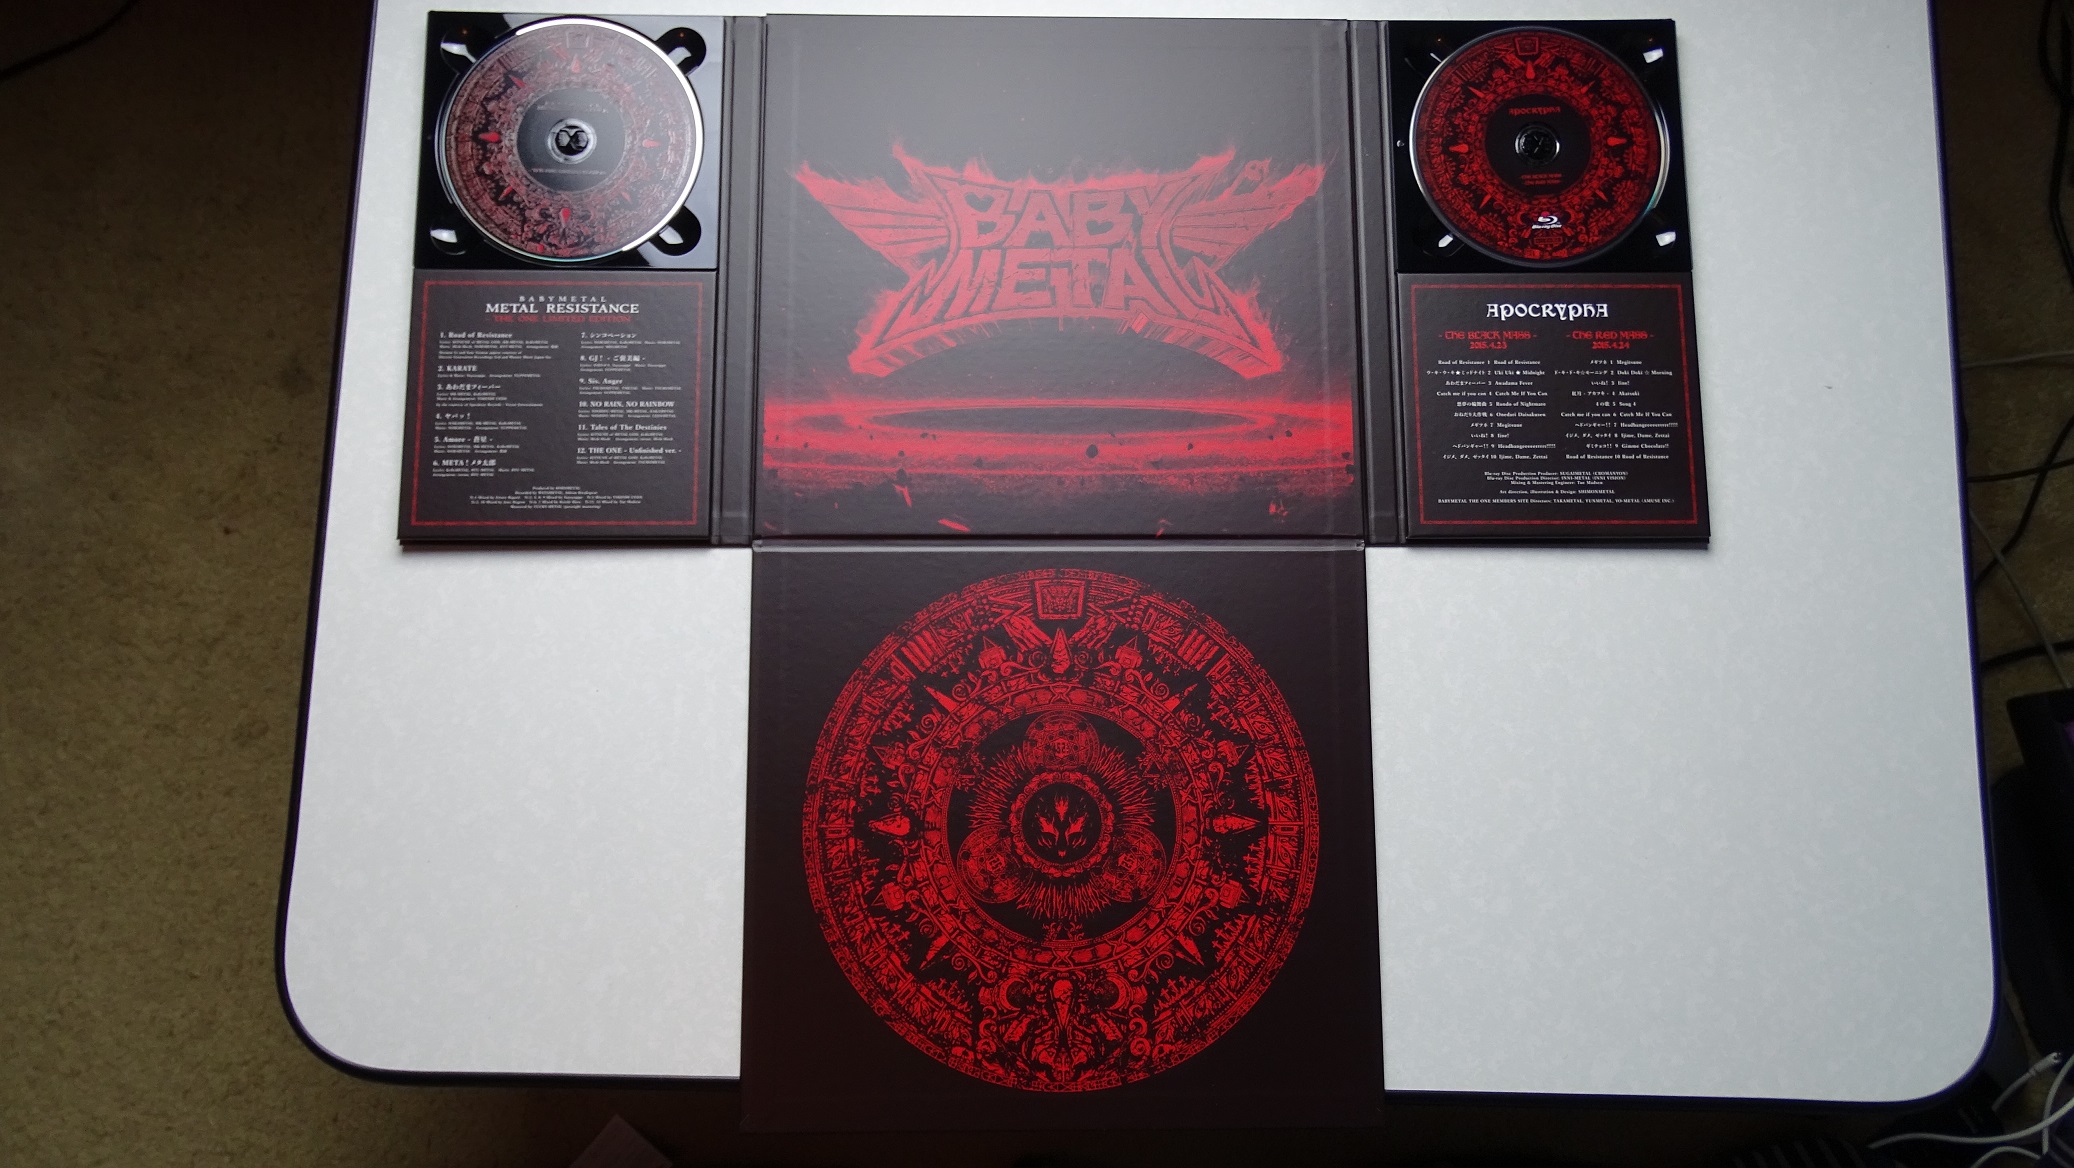 BABYMETAL Metal Resistance The ONE Limited Edition Review 